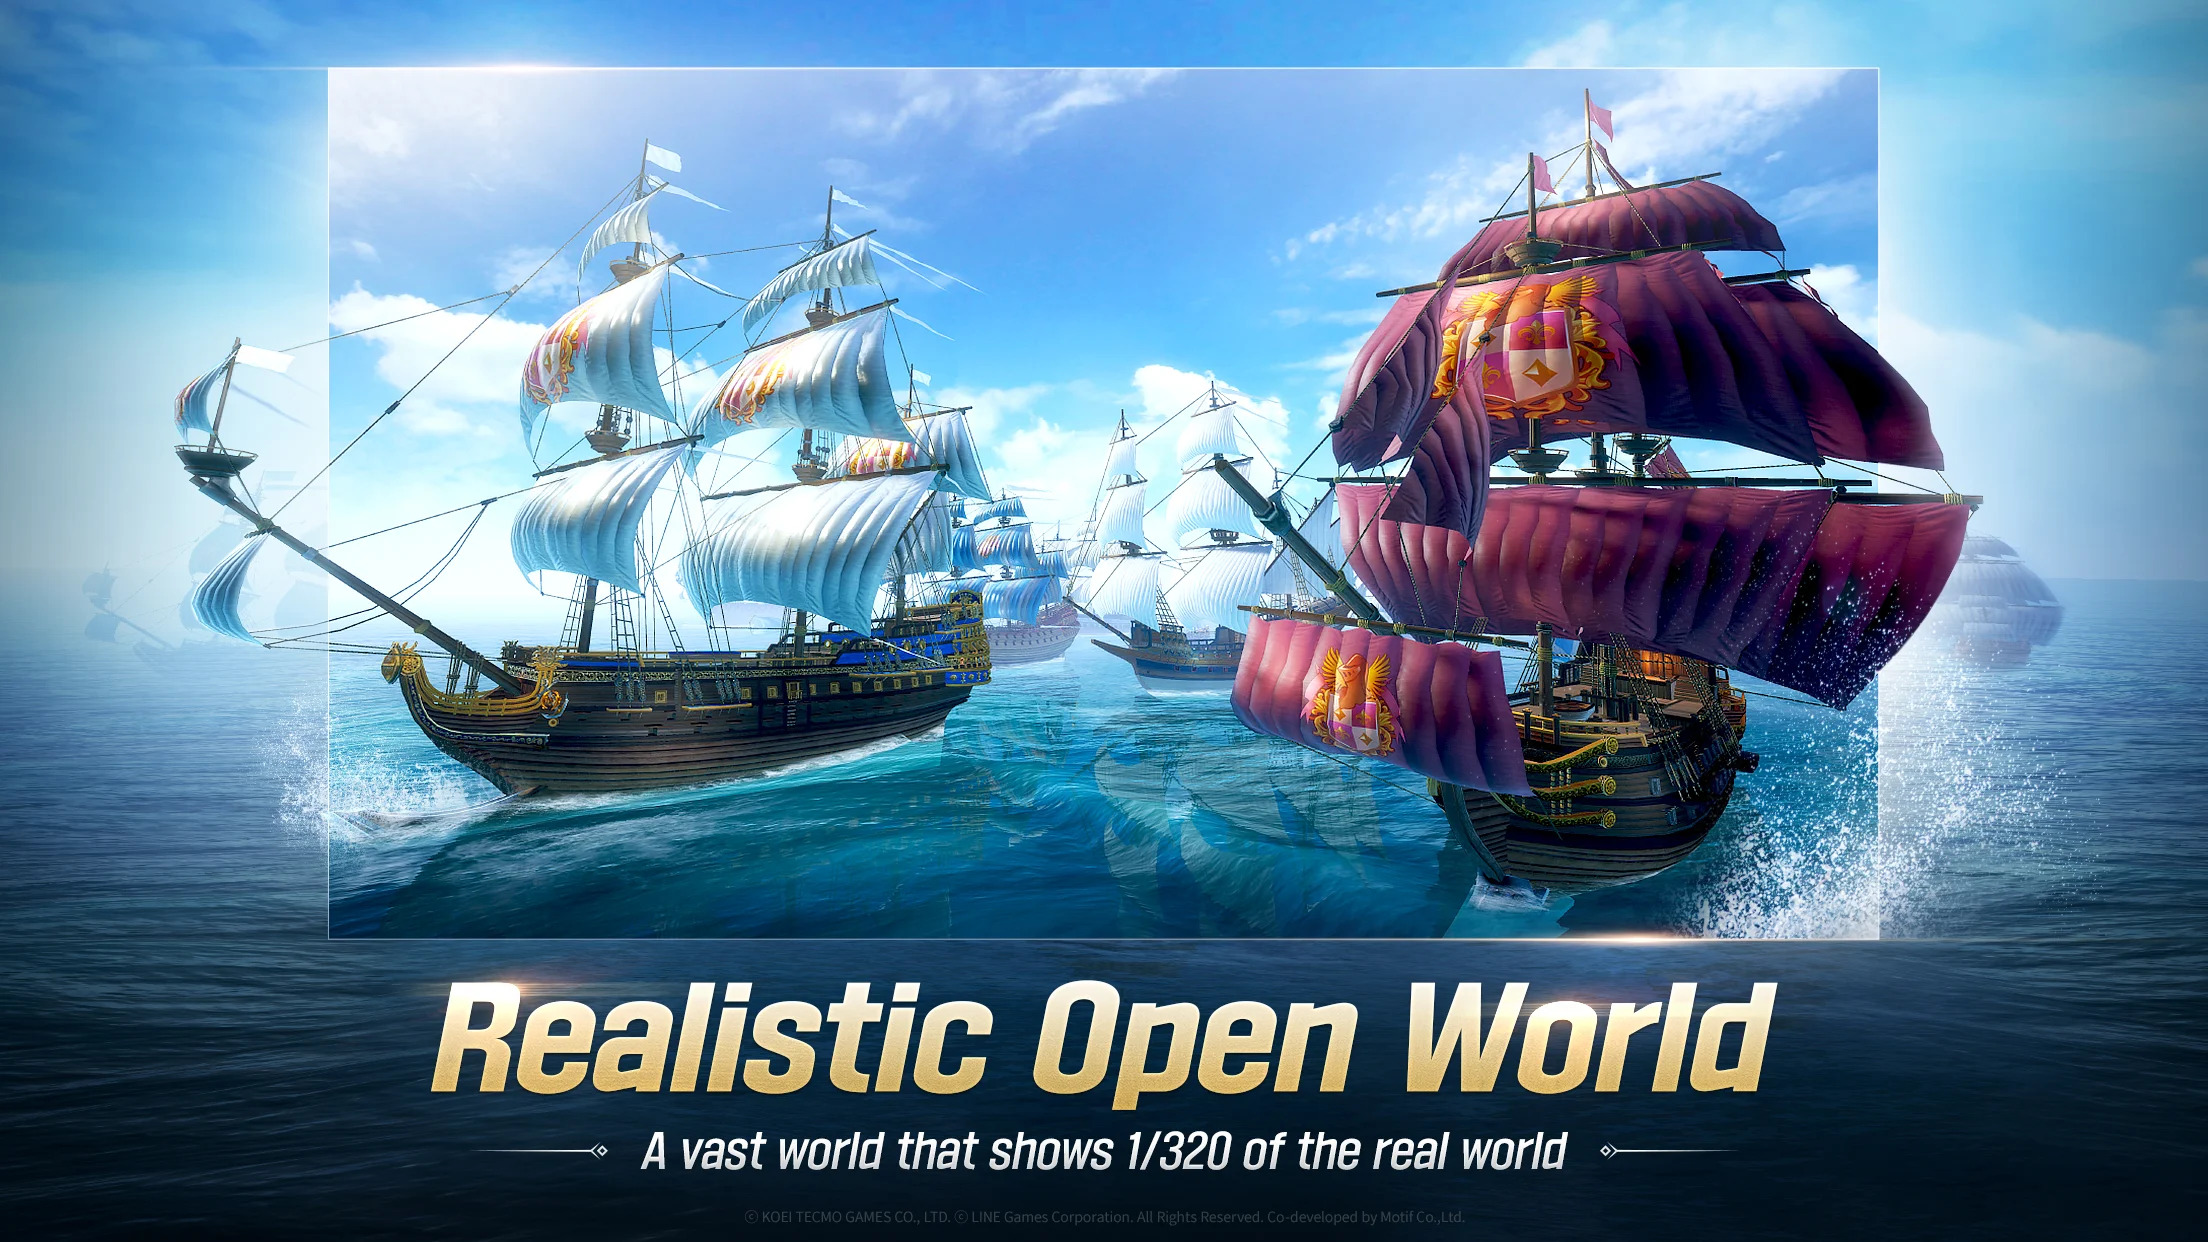 Join The New Adventures In "Uncharted Waters" Origin And Became A Pirate!